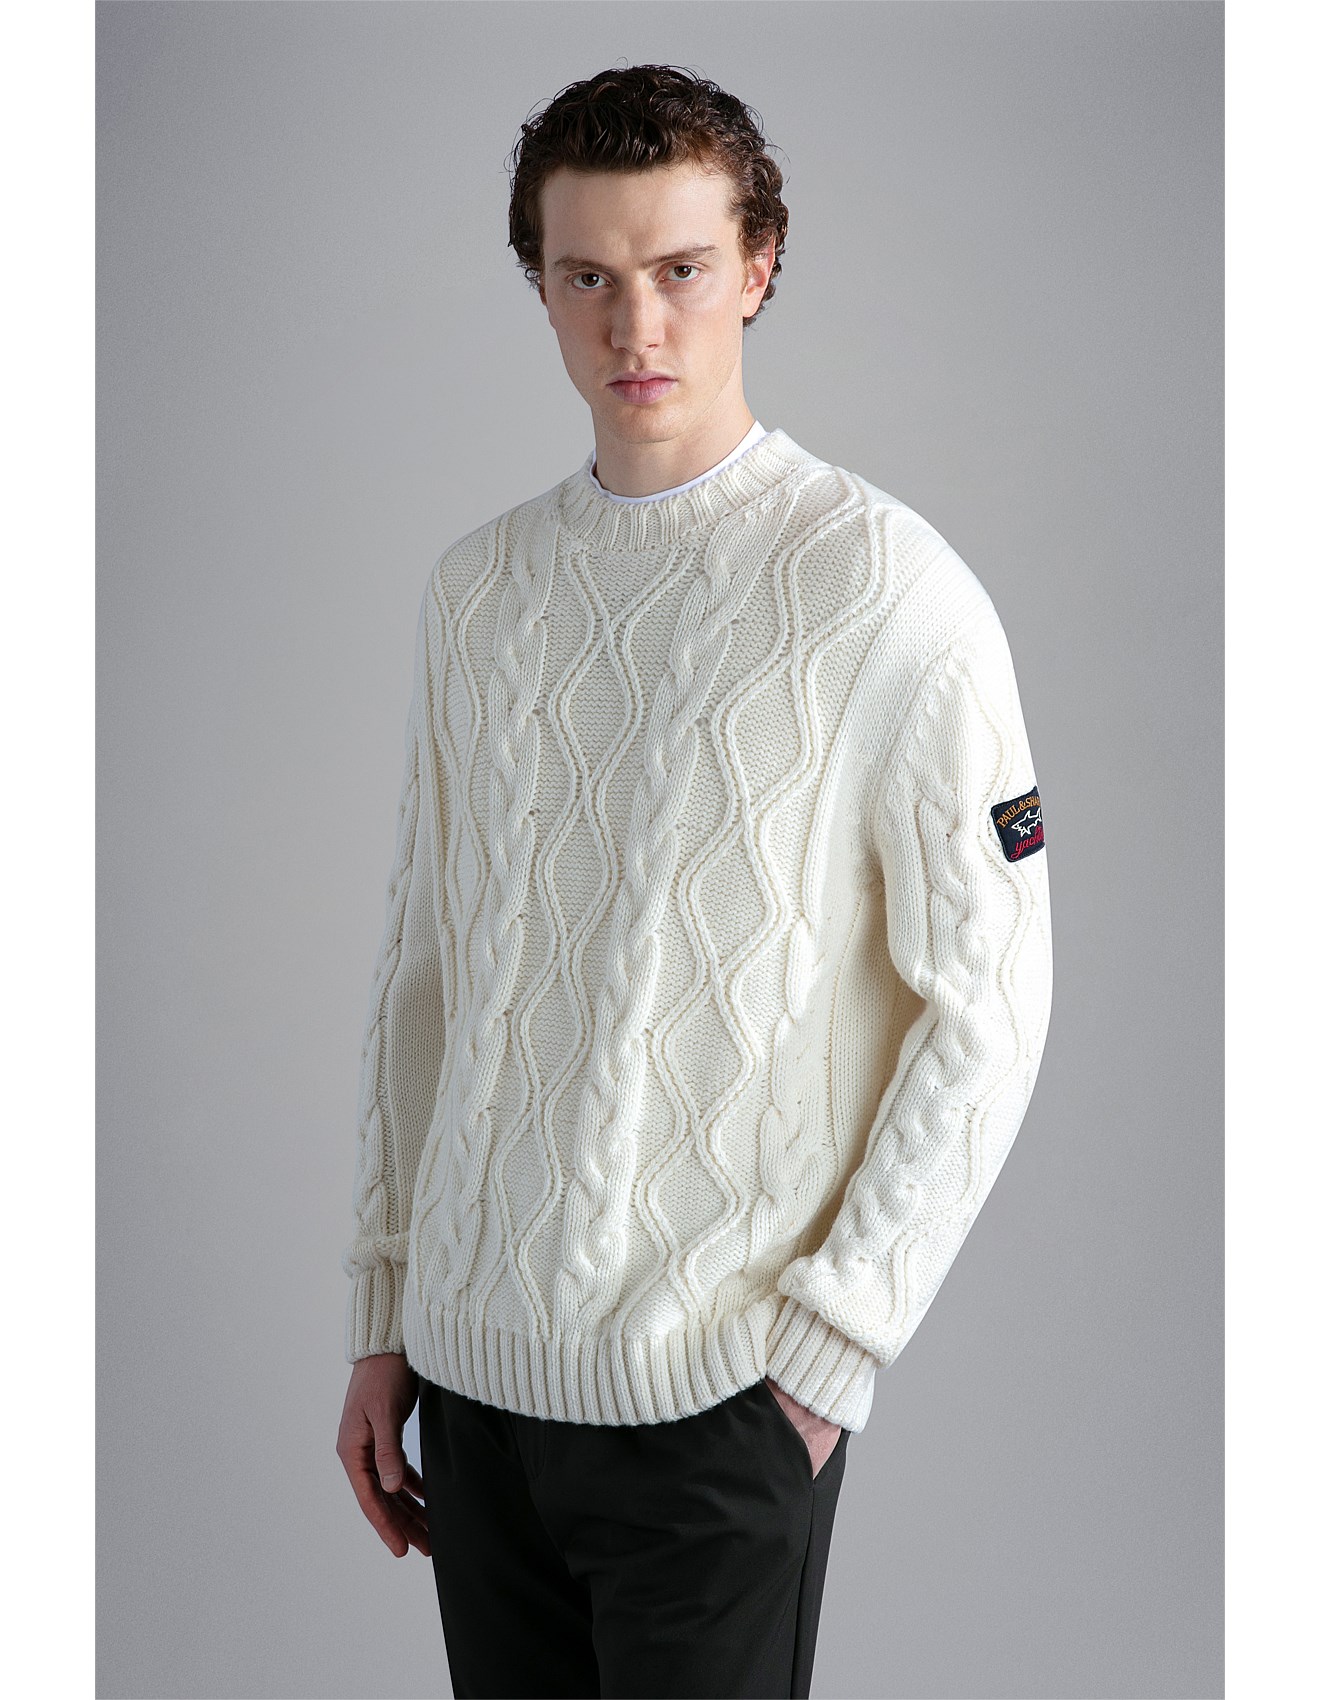 THE FISHERMAN COLLECTION CABLE CREW NECK KNIT